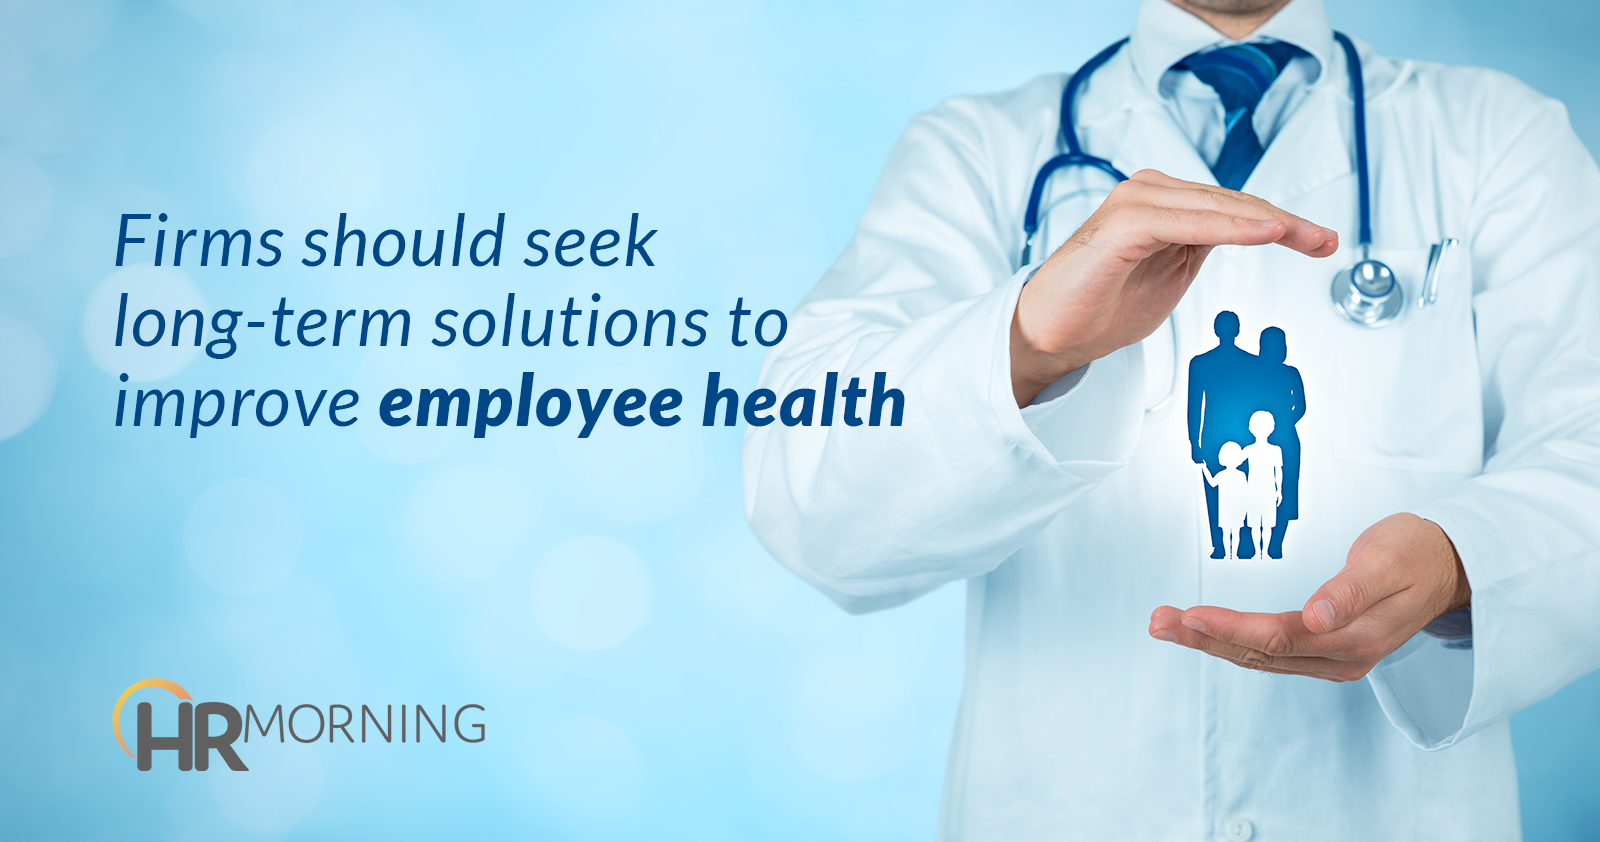 firms should seek long-term solutions to improve employee health